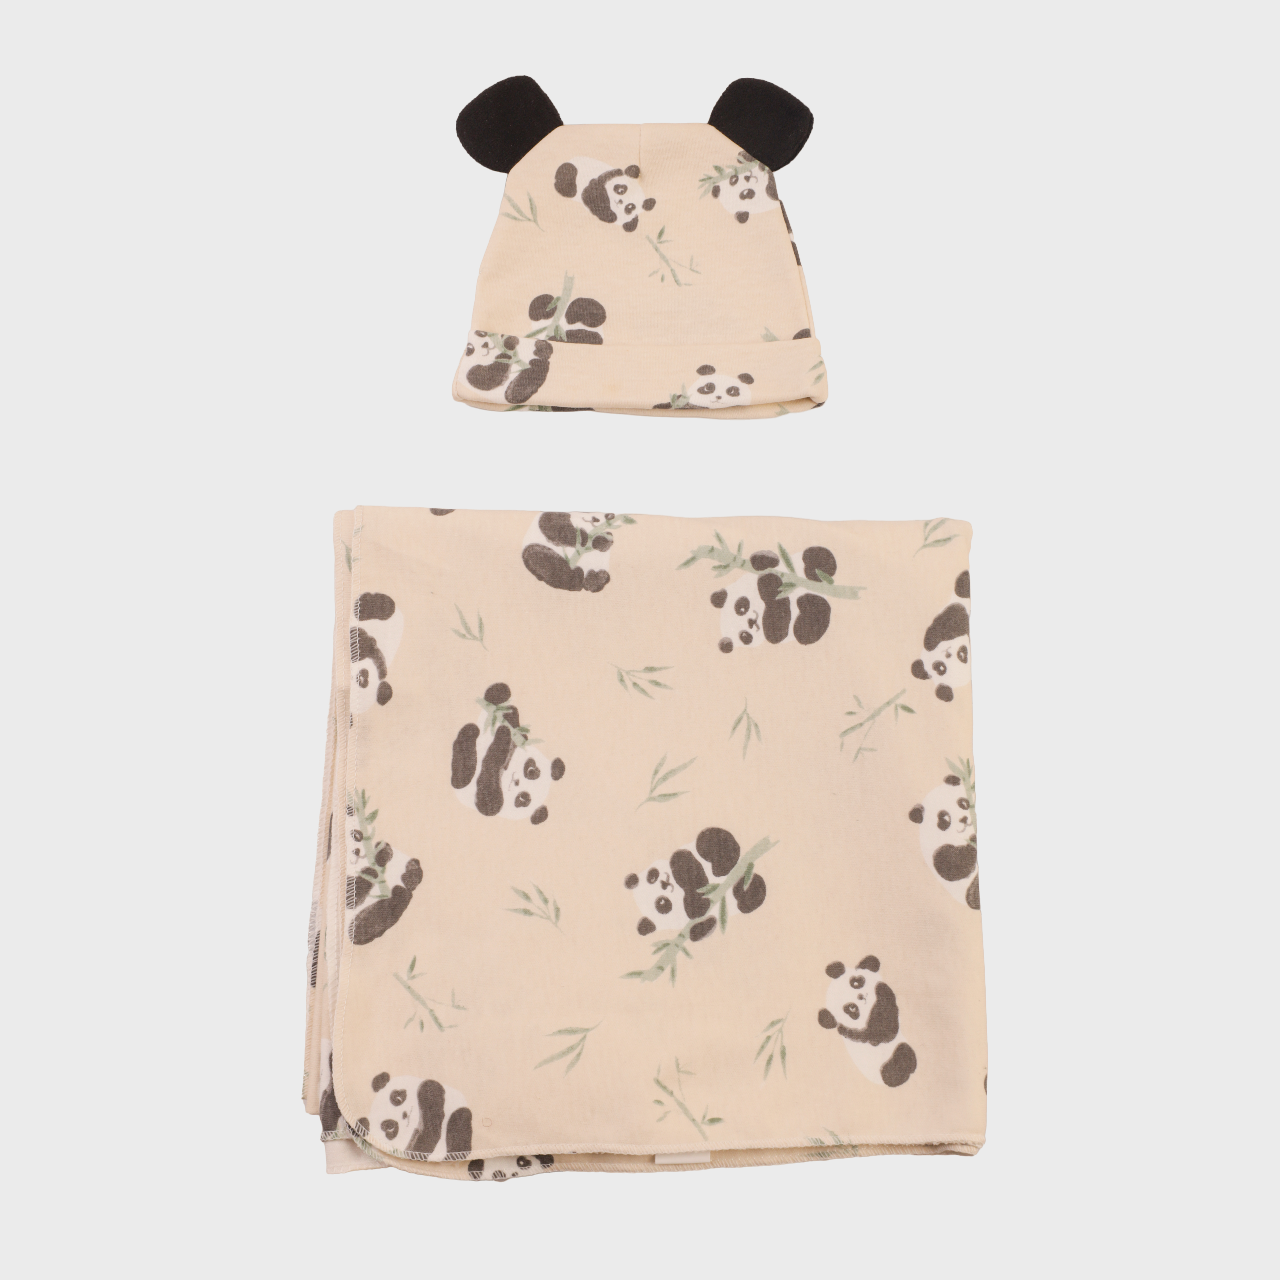 Shows blanket folded up with the hat. Depicts the cute panda design.